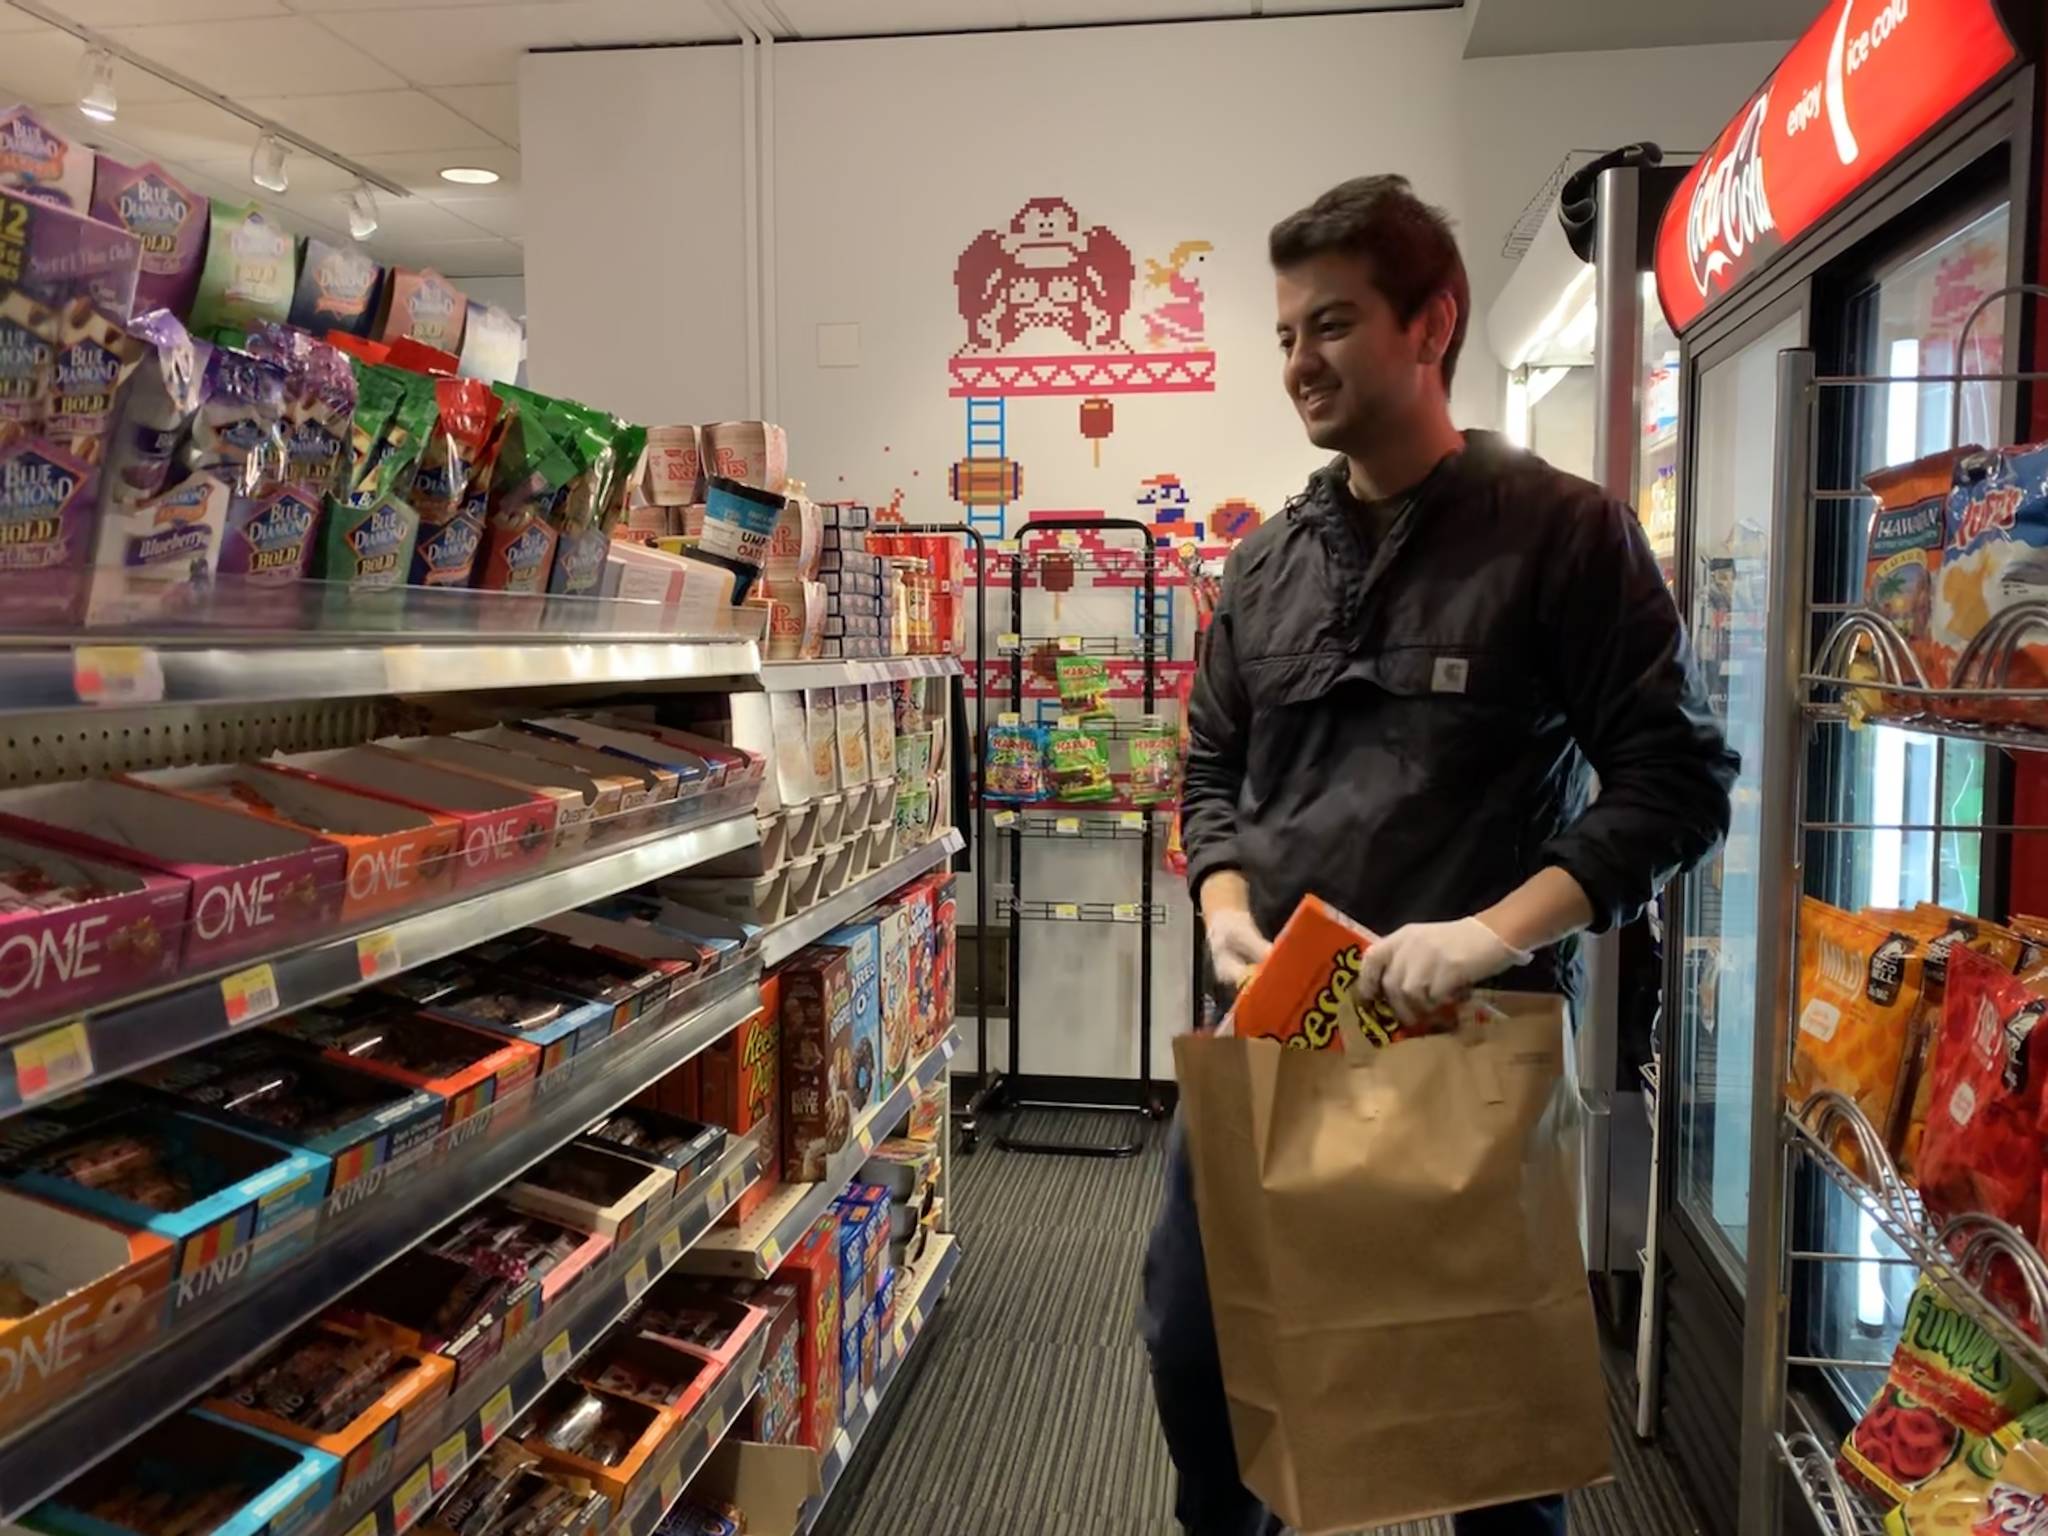 Alex Comair, director of operations, shops at the DigiPen student store for a delivery. Photo courtesy of DigiPen Institute of Technology